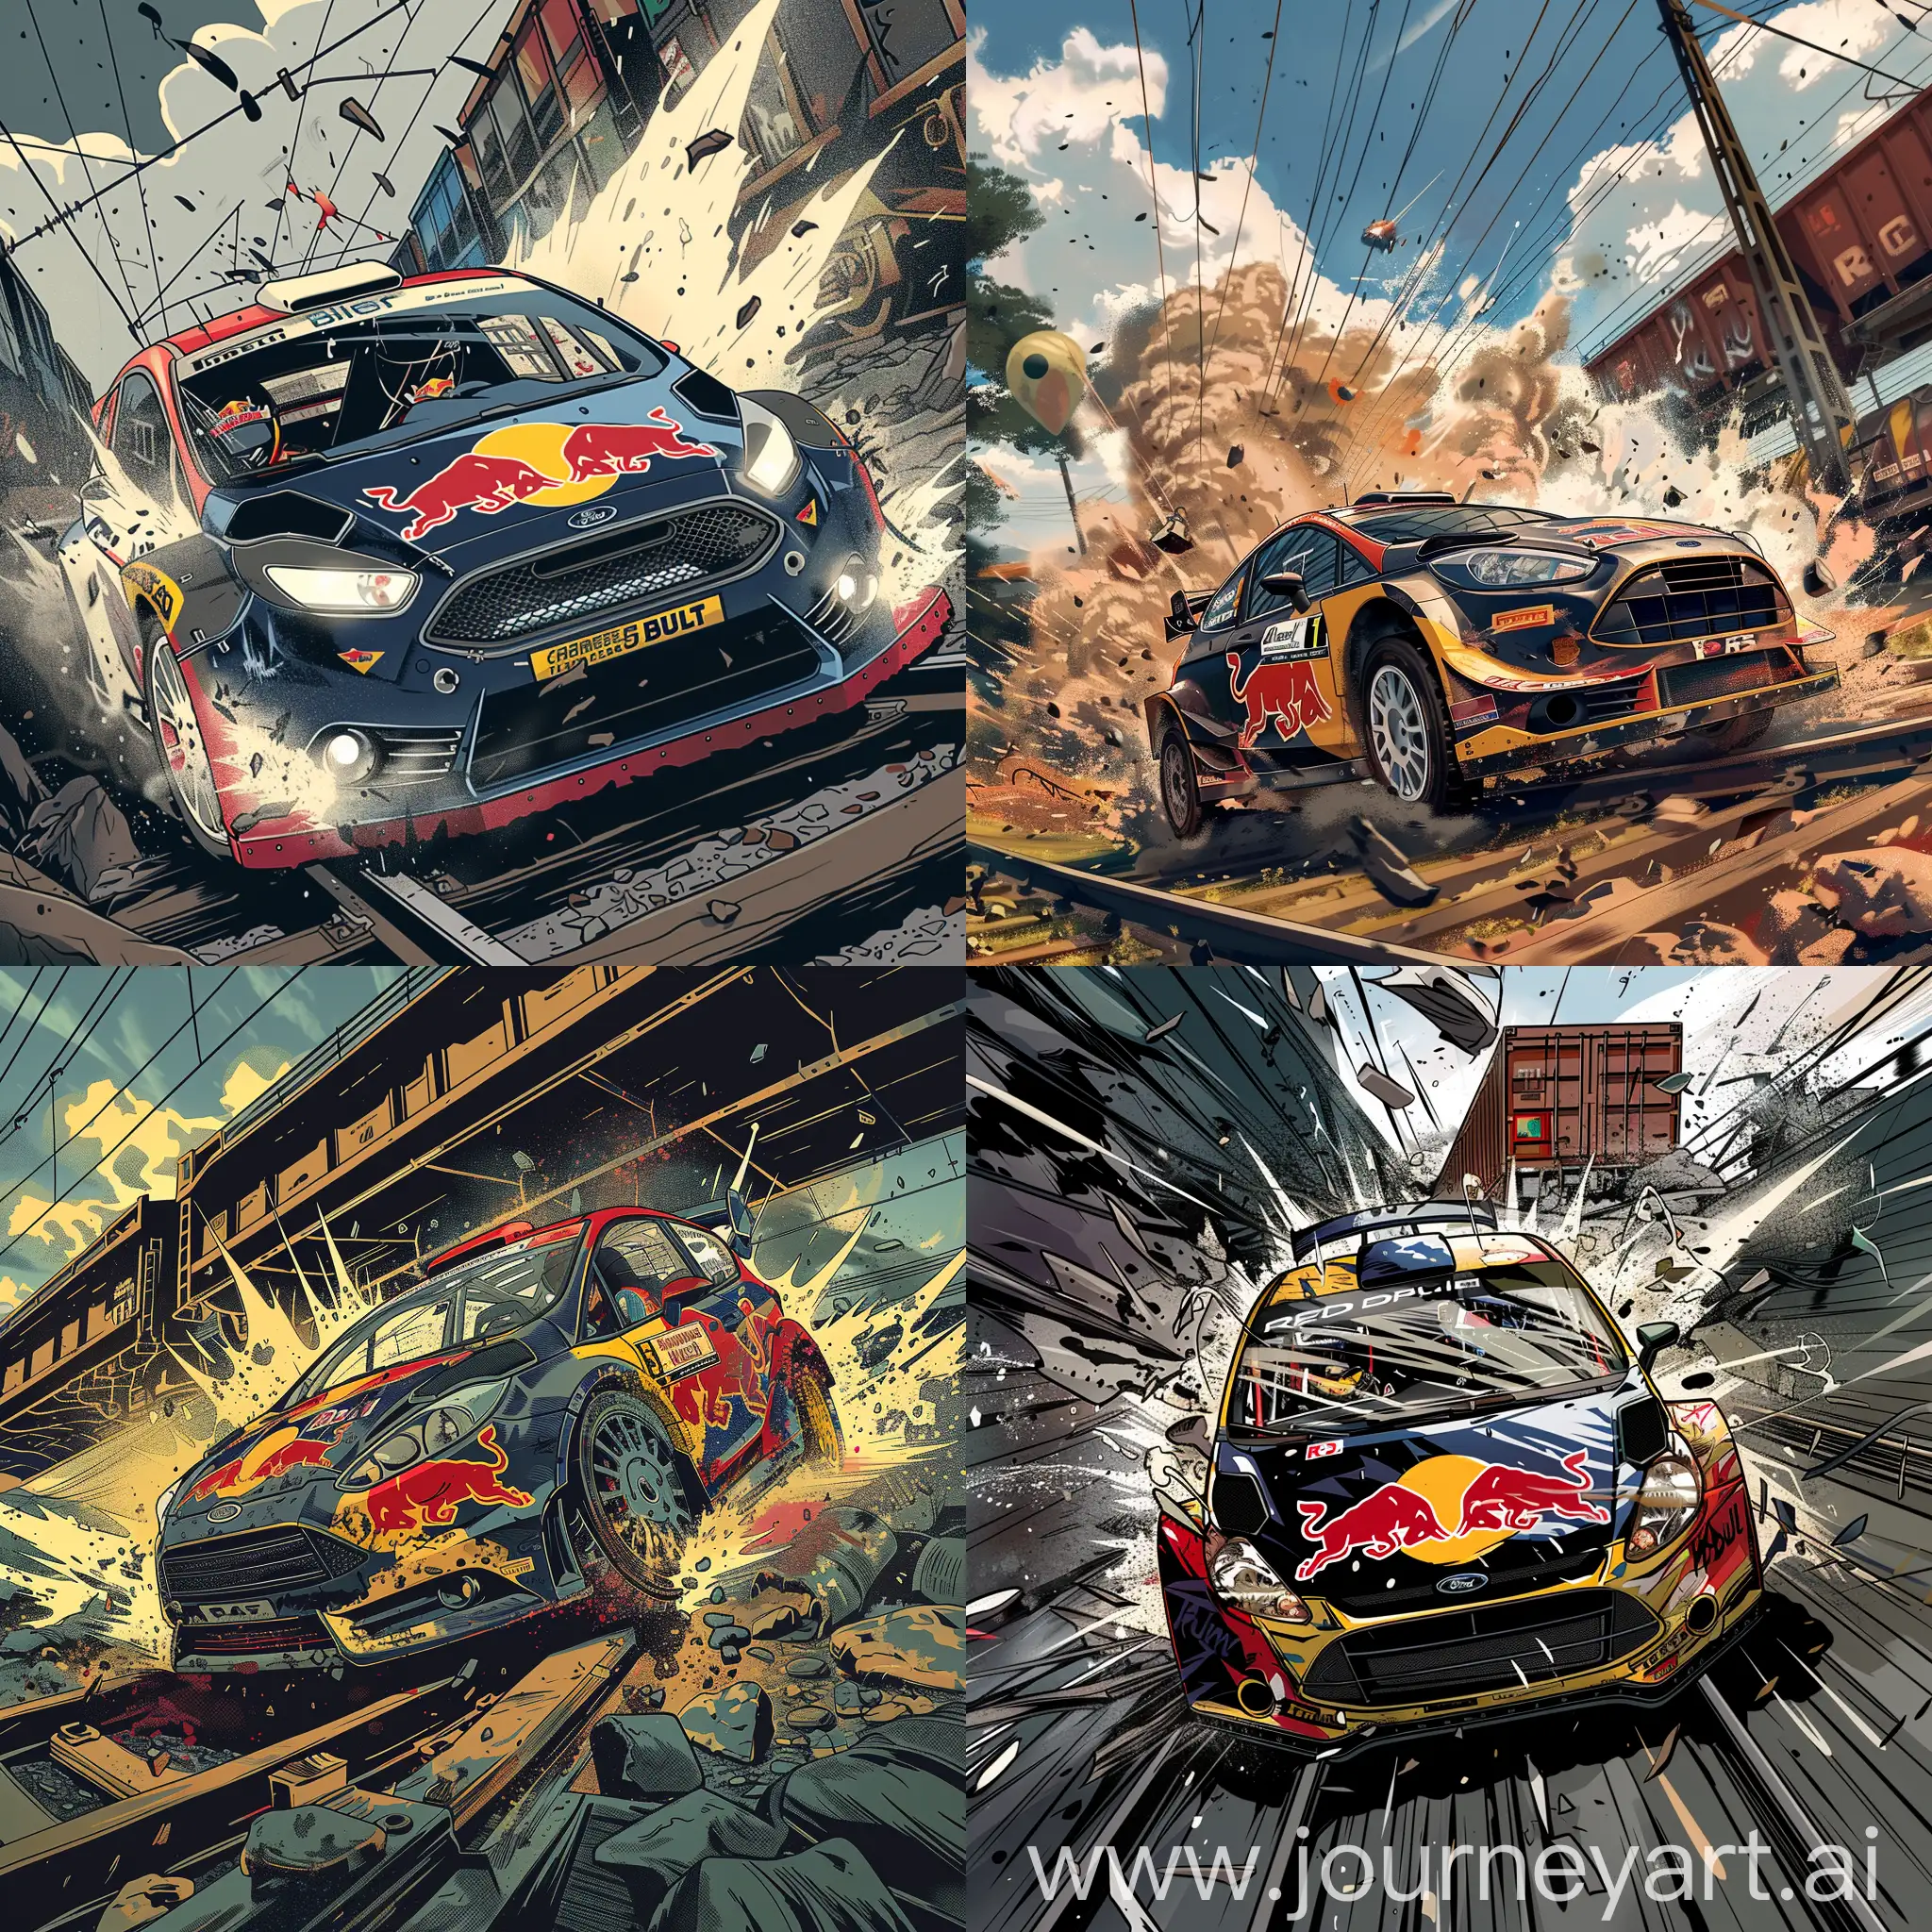 Rally-Car-Crash-Ford-Fiesta-R5-in-Red-Bull-Livery-Collides-with-Freight-Train